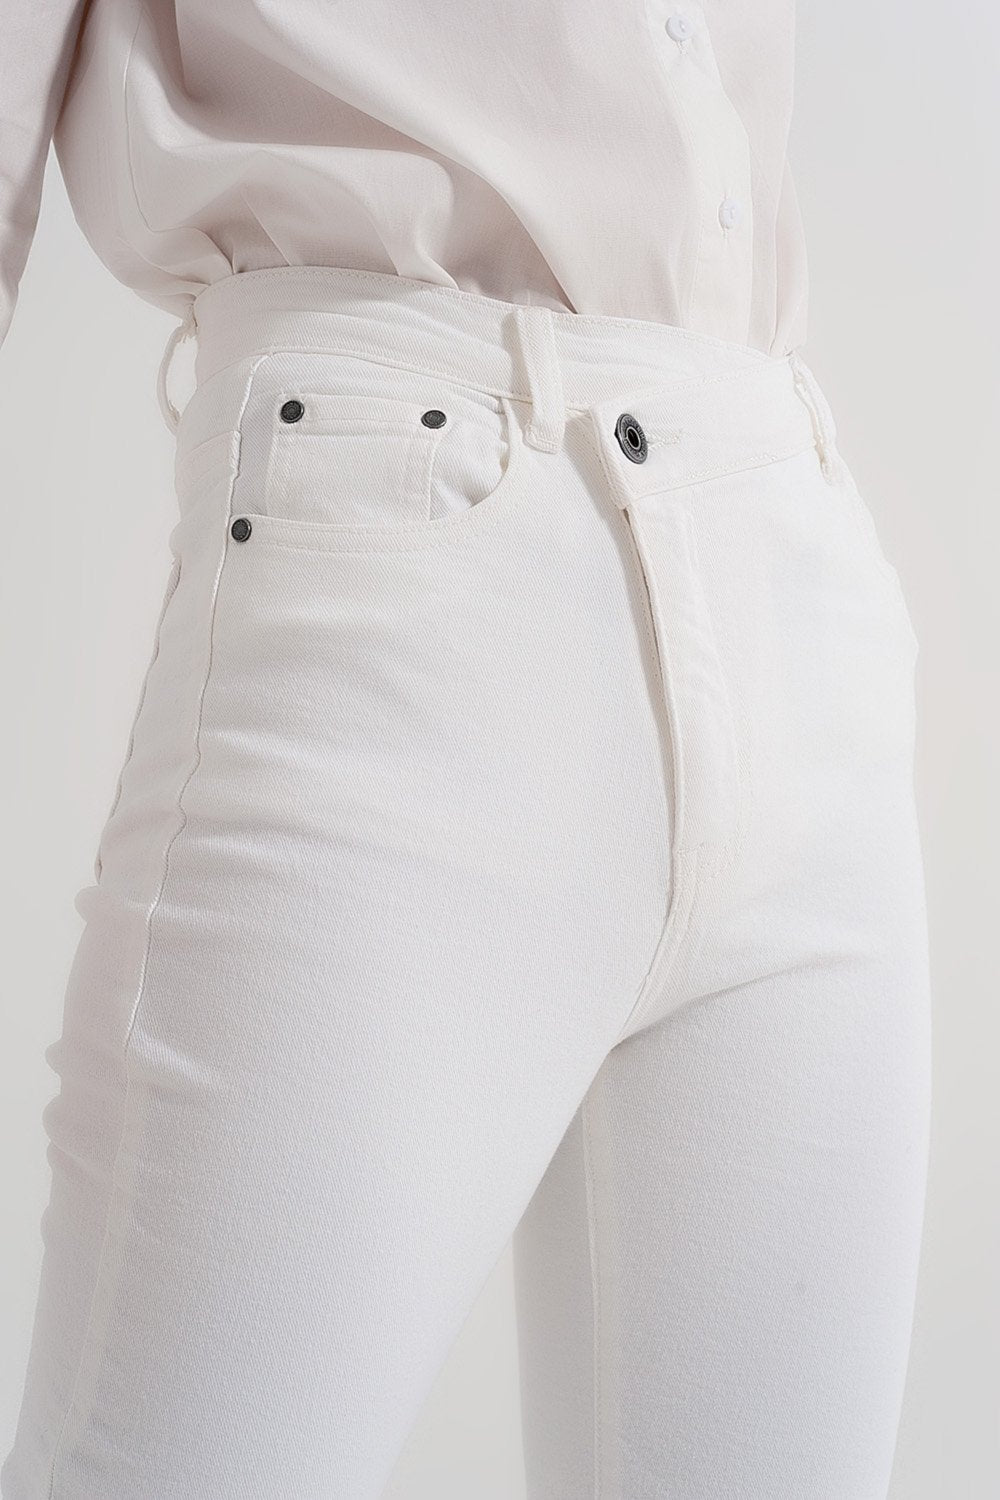 Slim Jeans With Asymmetric Button in Cream